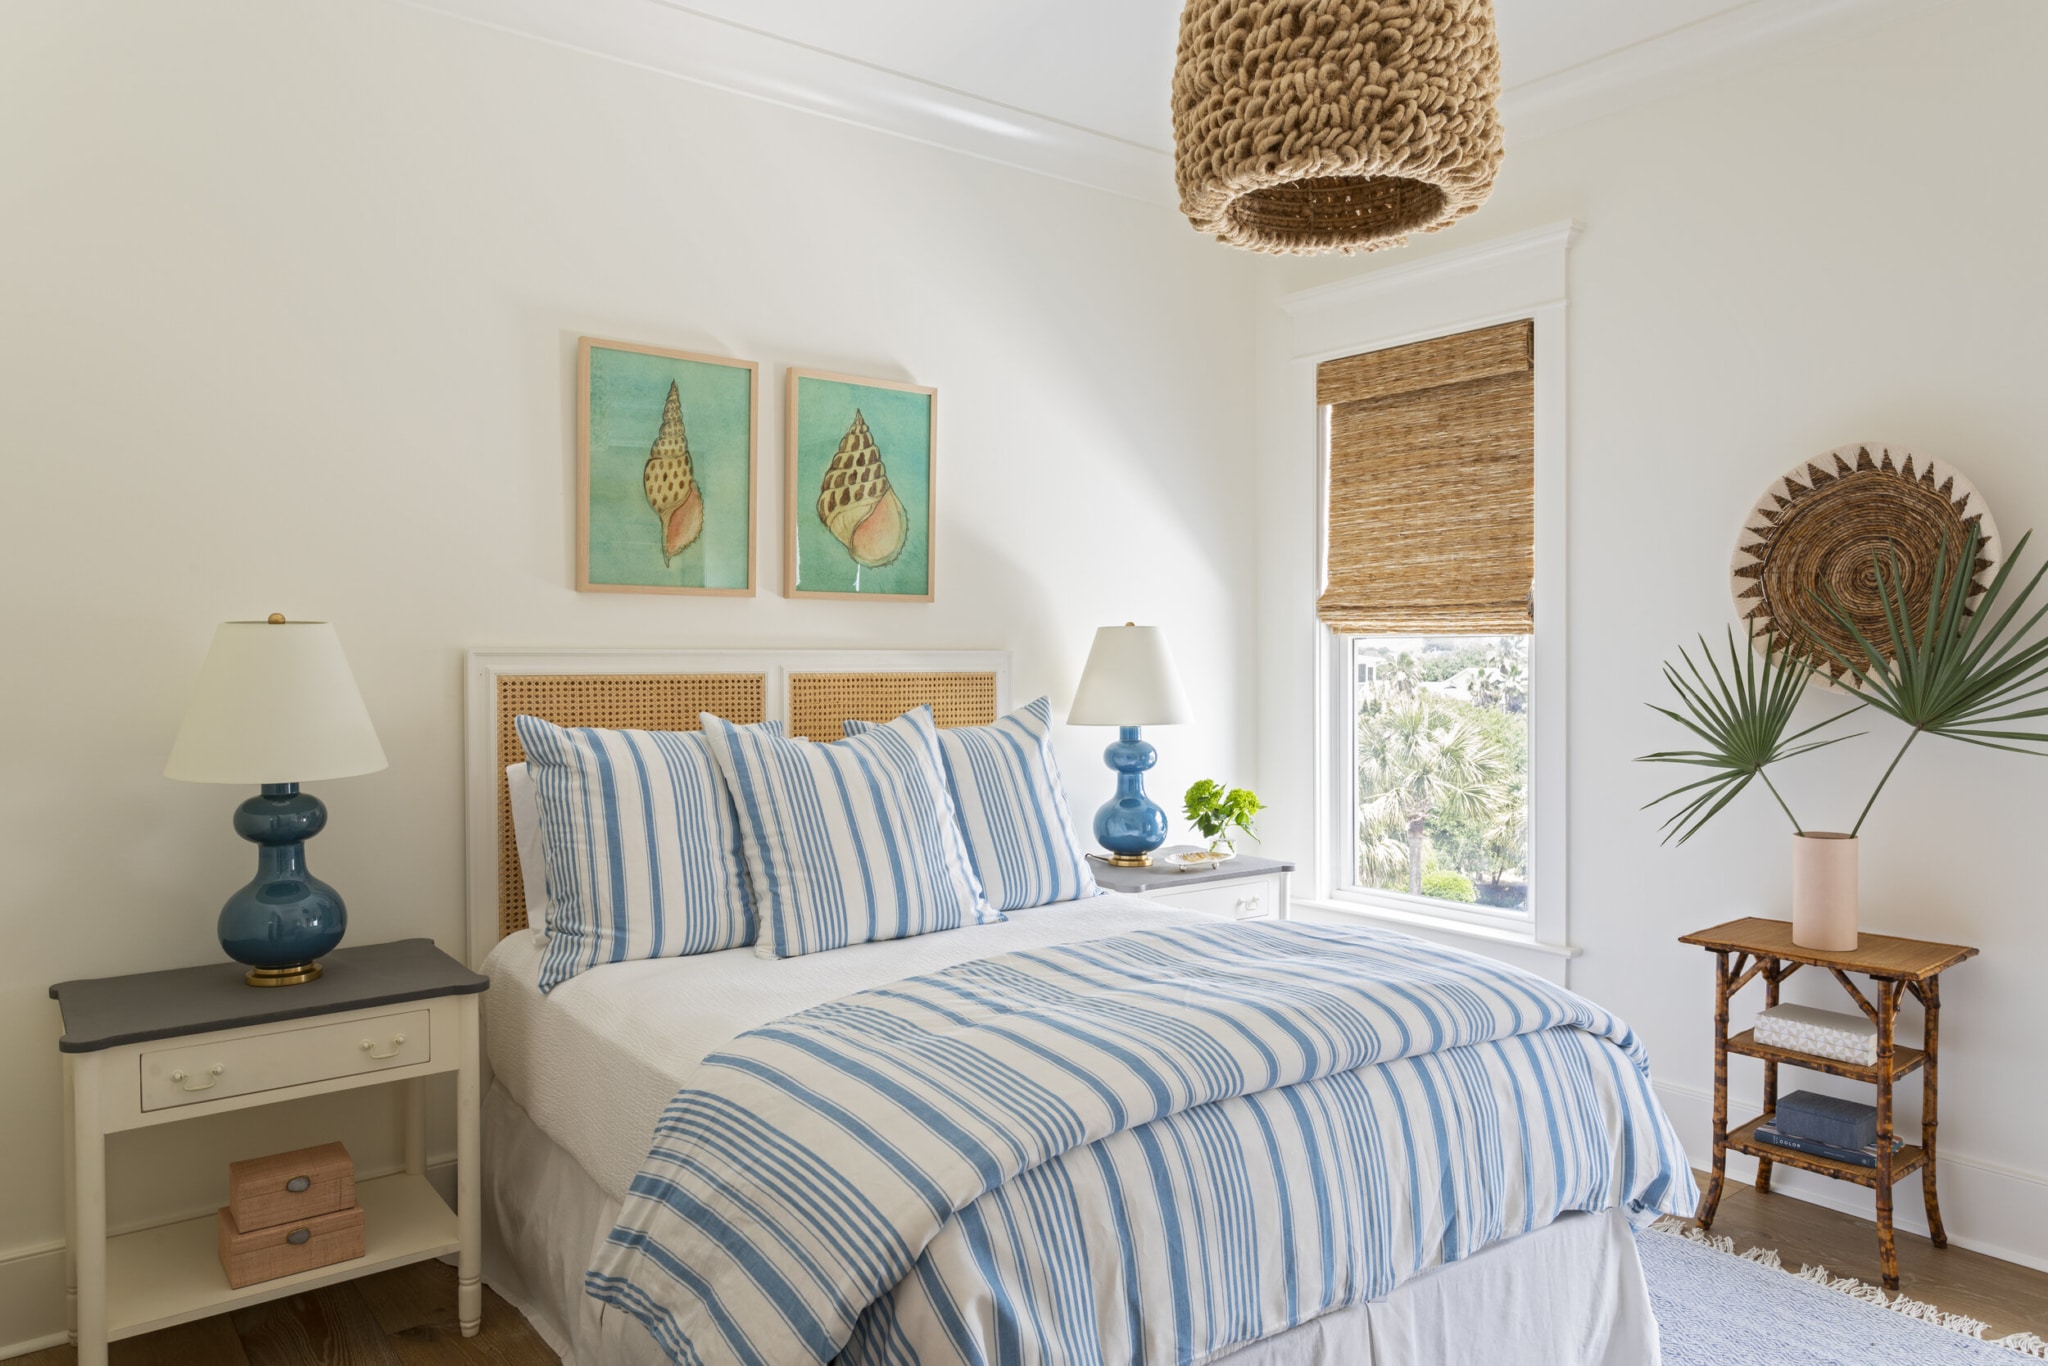 Isle of Palms house tour - Allison Elebash - Julia Lynn Photography -bedroom - blue and white - blue and white bedroom - pair of chairs